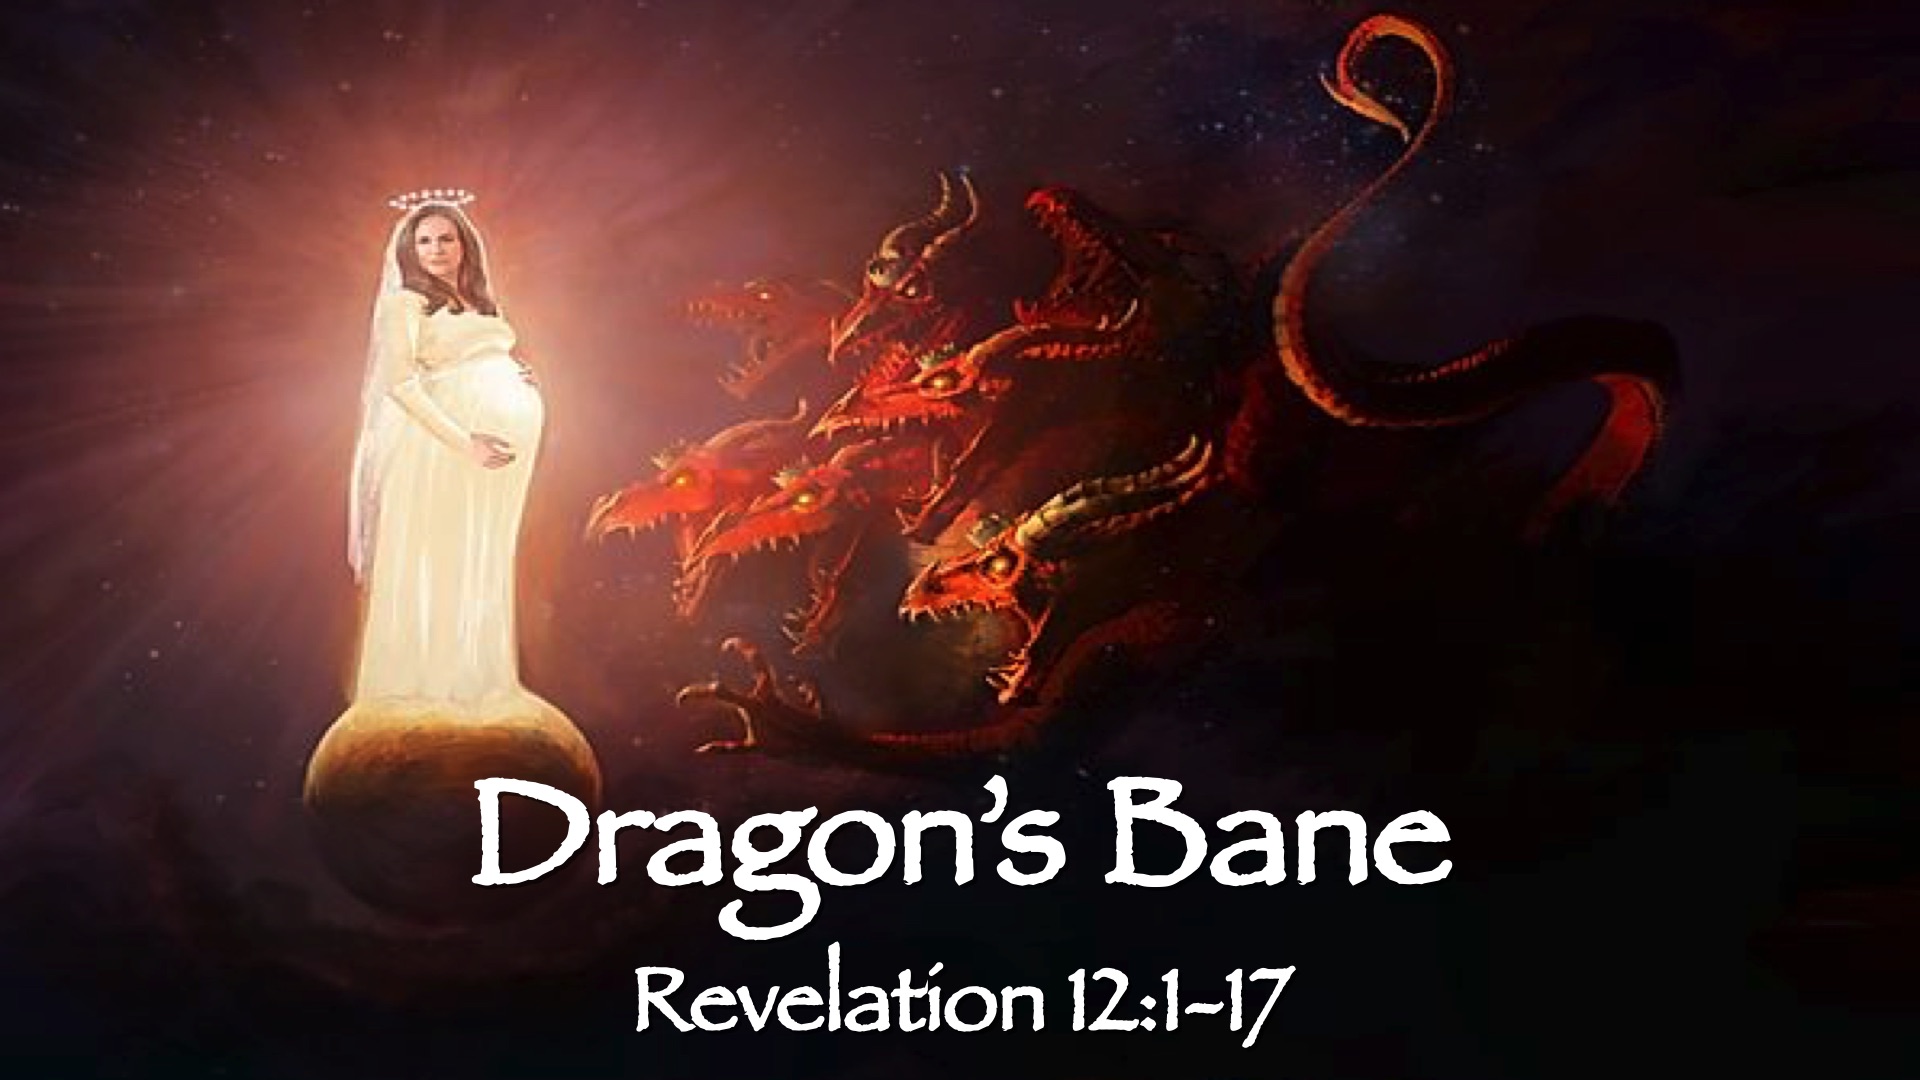 “The Book of Revelation: Dragon’s Bane” Part 1